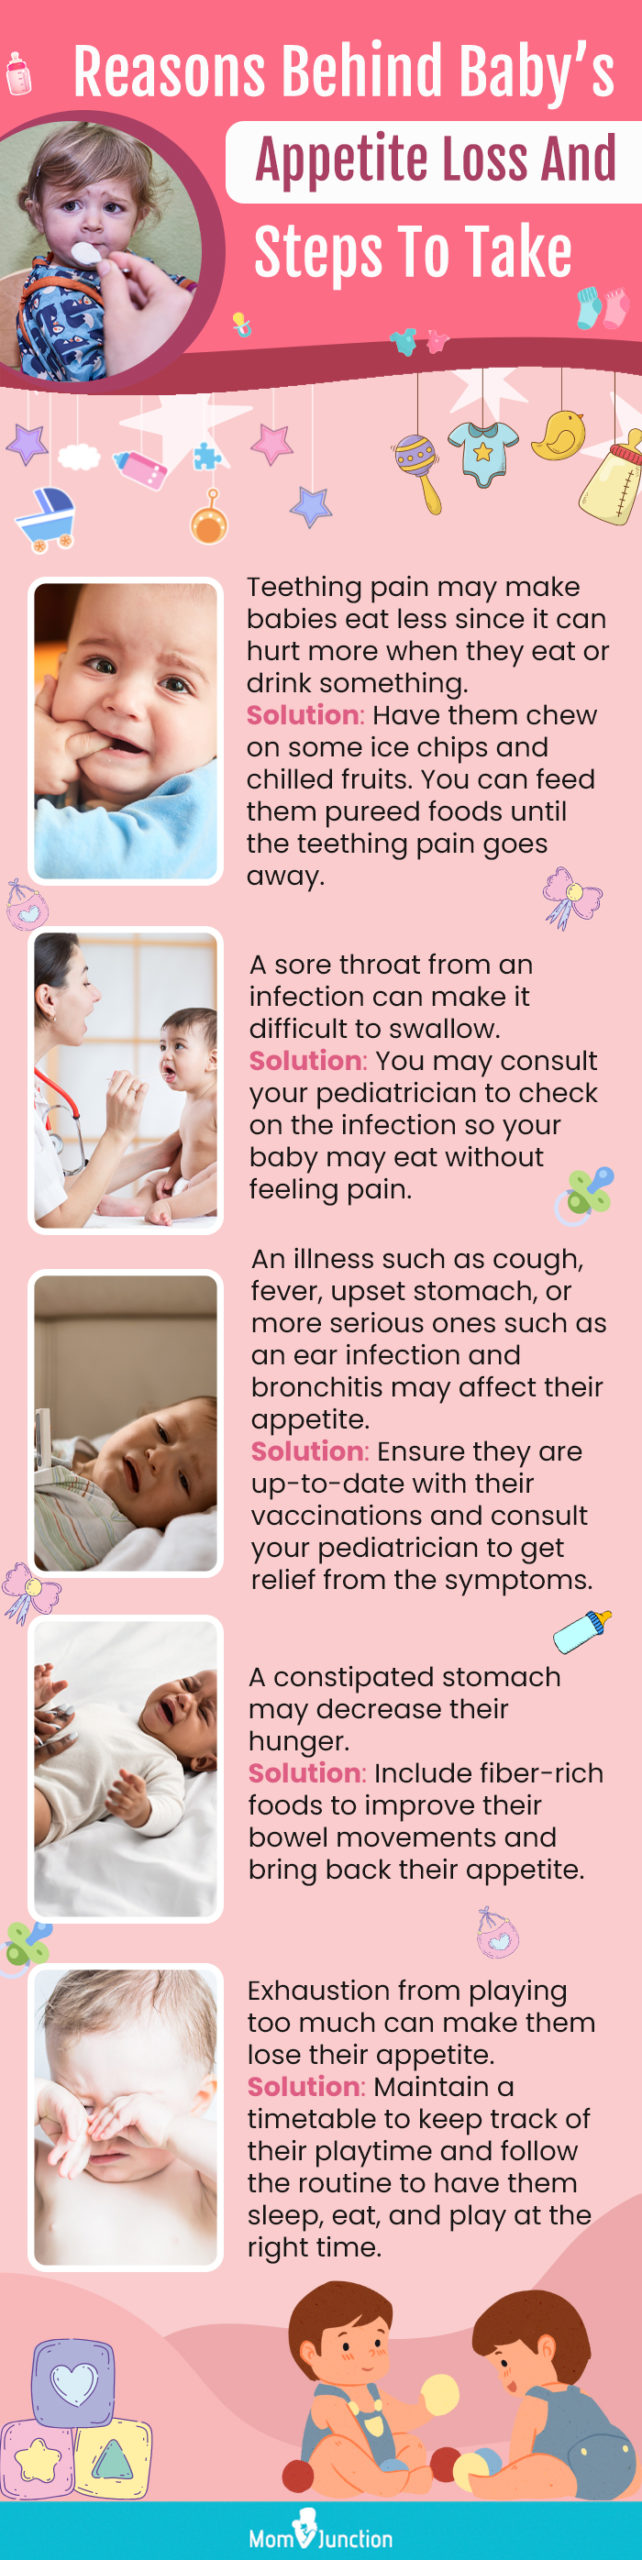 reasons behind baby’s appetite loss and steps to take (infographic)